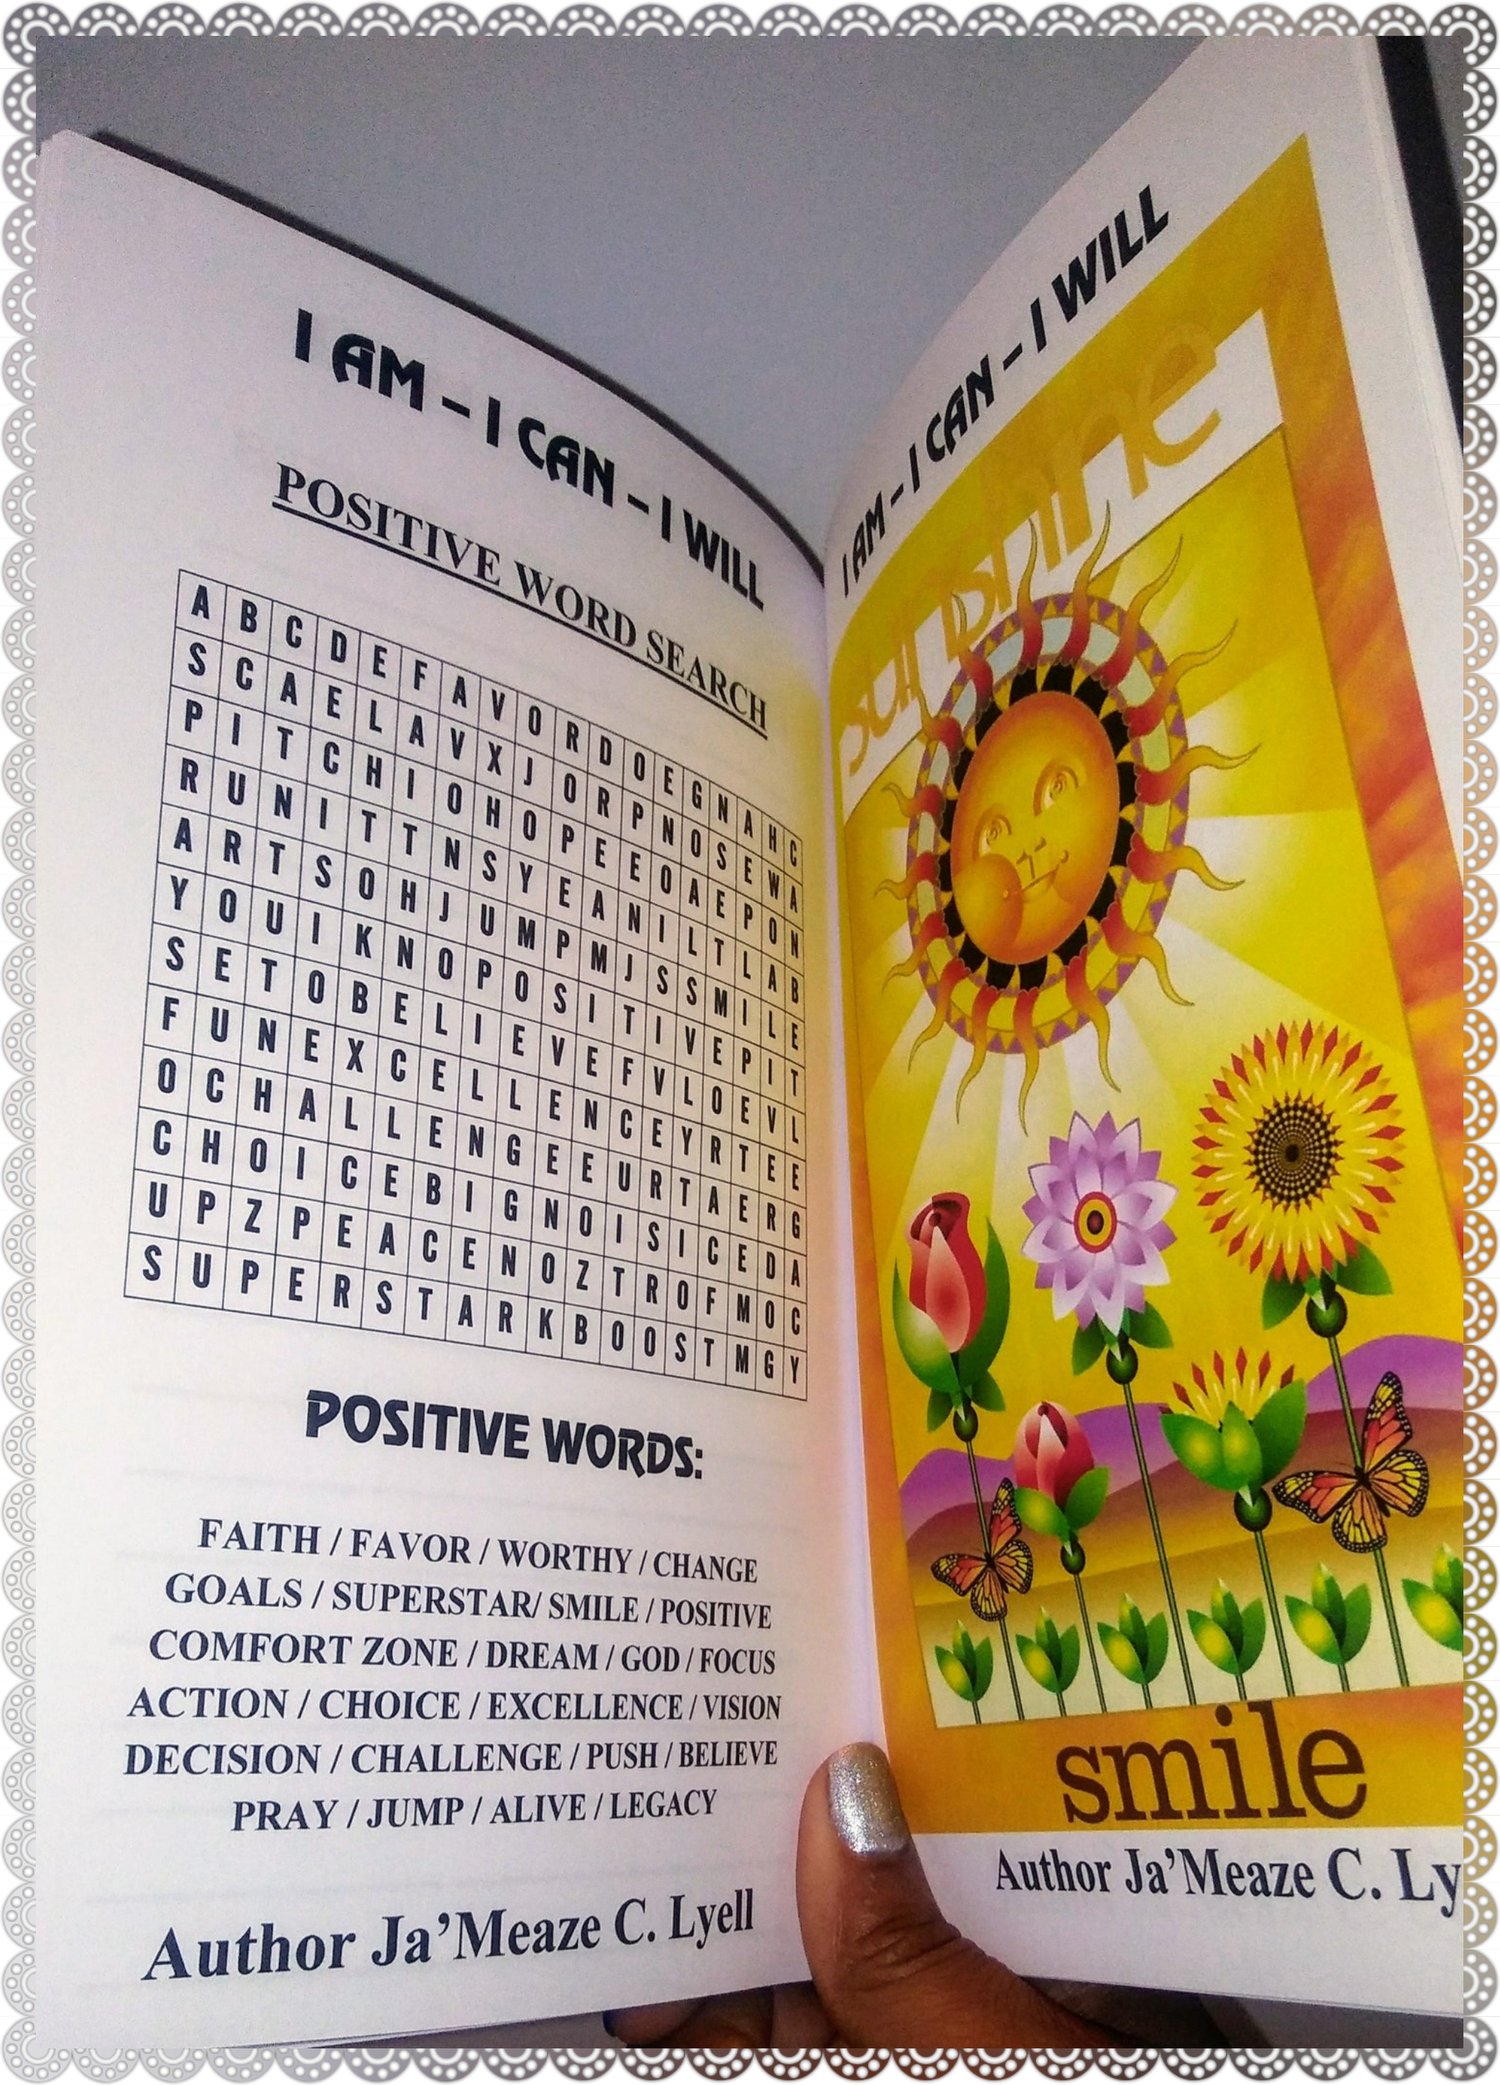 Image of I AM I CAN AND I WILL Positive Affirmations Self Empowerment Journal